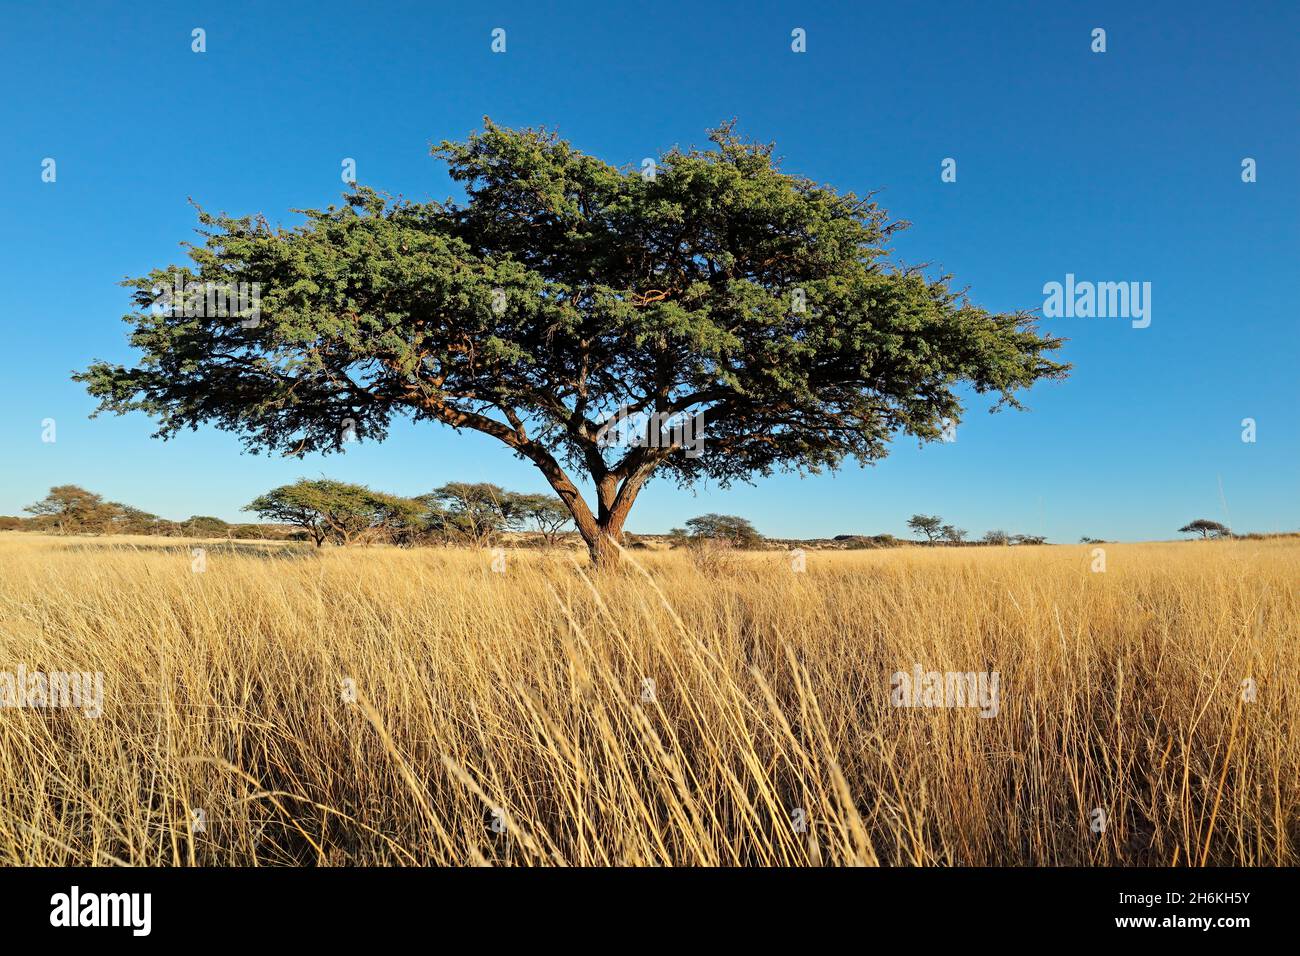 African camel-thorn tree (Vachellia erioloba) in grassland, South Africa Stock Photo